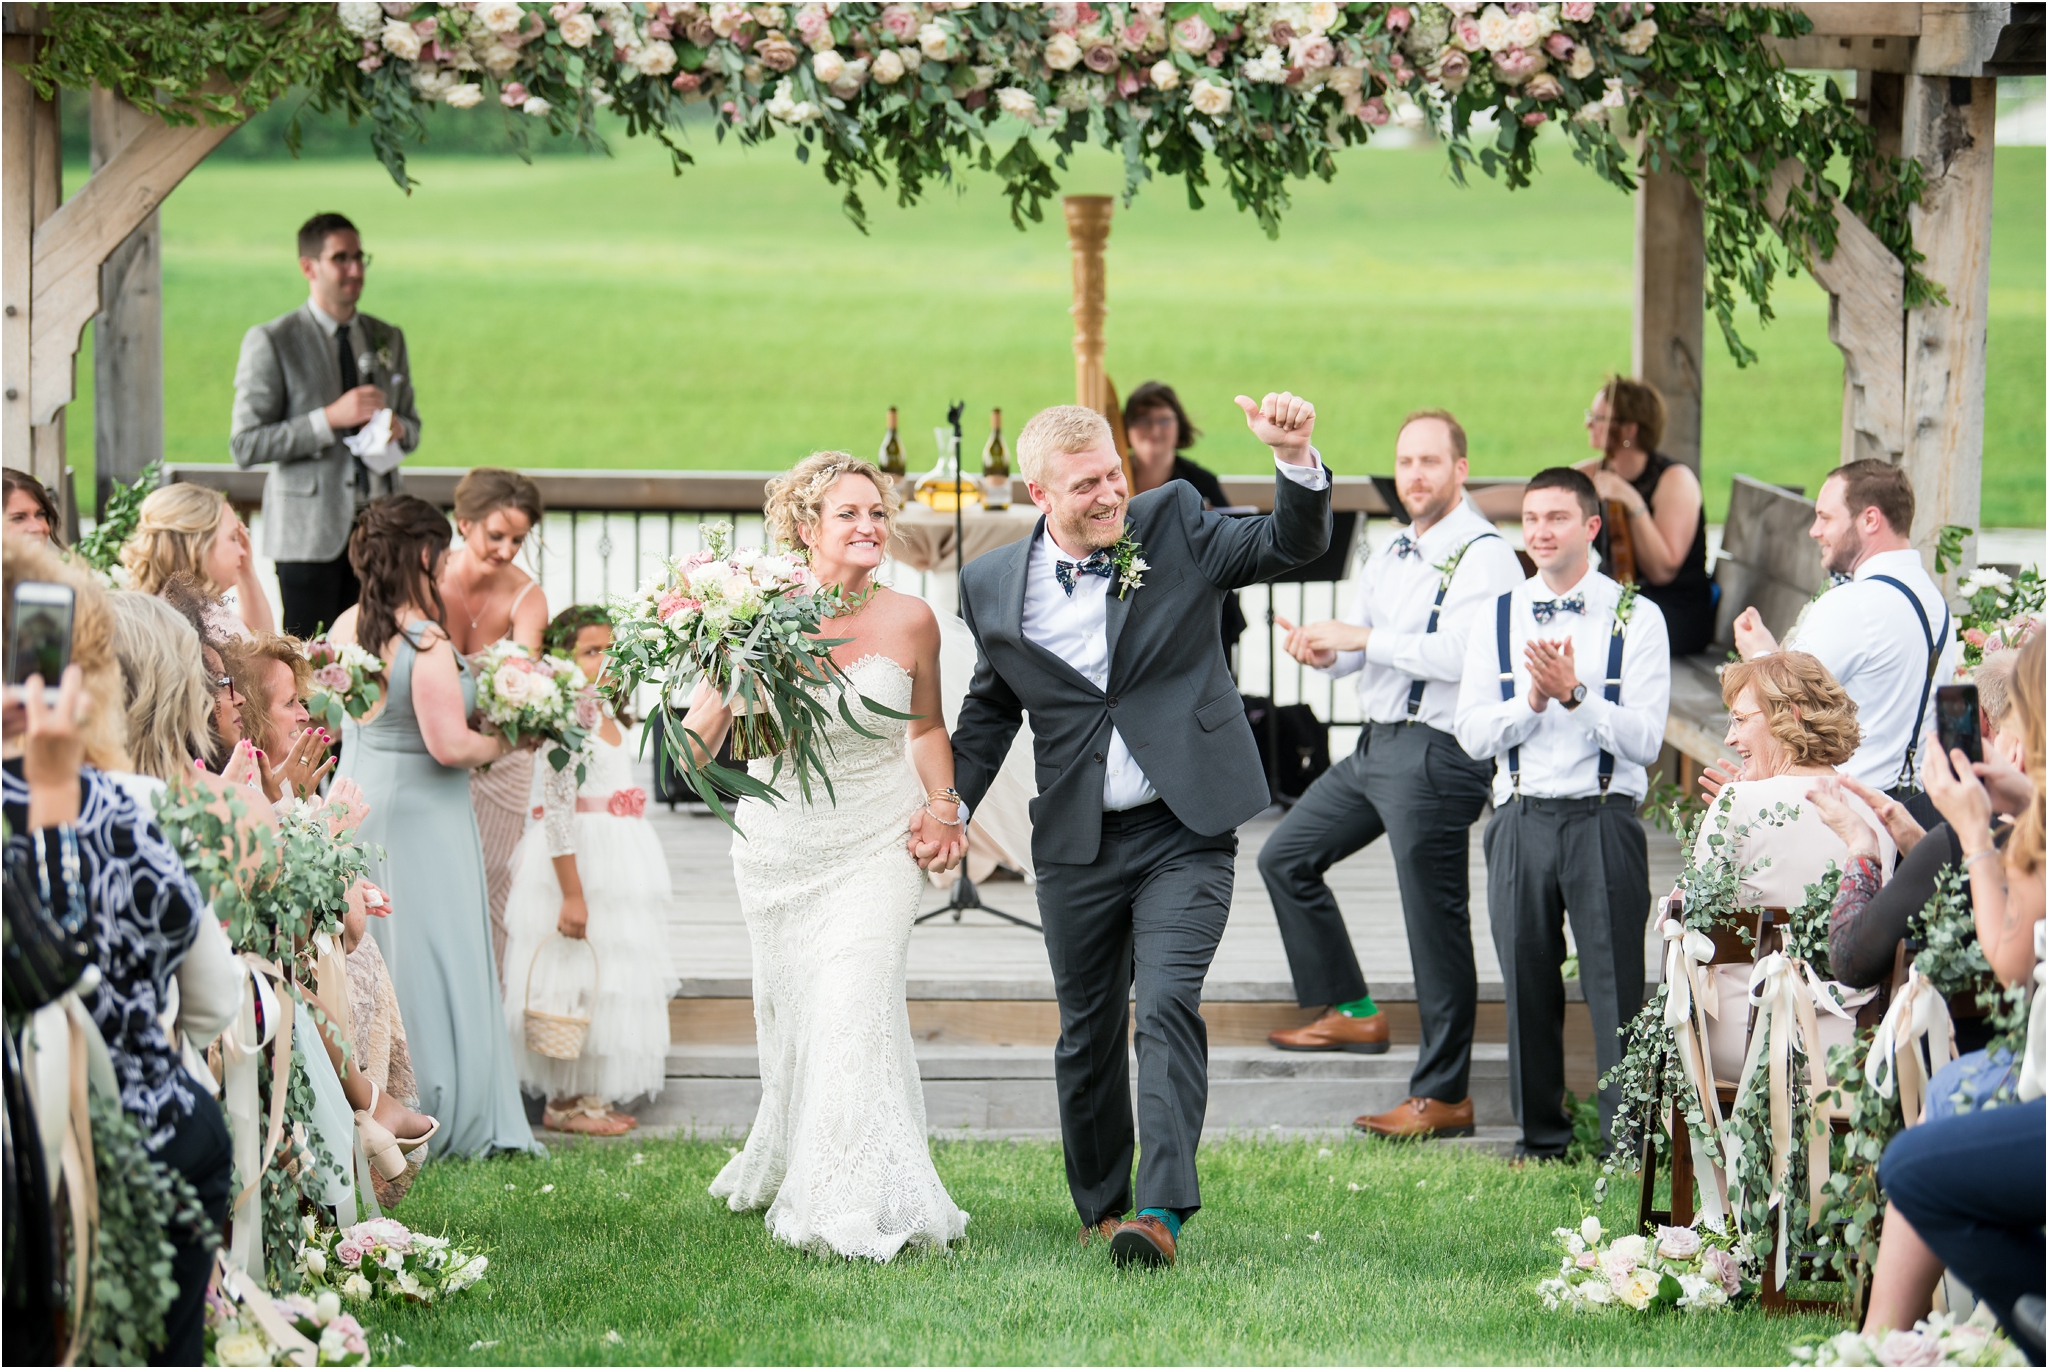 Lindley Farmstead at Chatham Hills | Sarah and Rachel Wedding Photographers | Westfield, Indiana wedding | recessional celebration exit